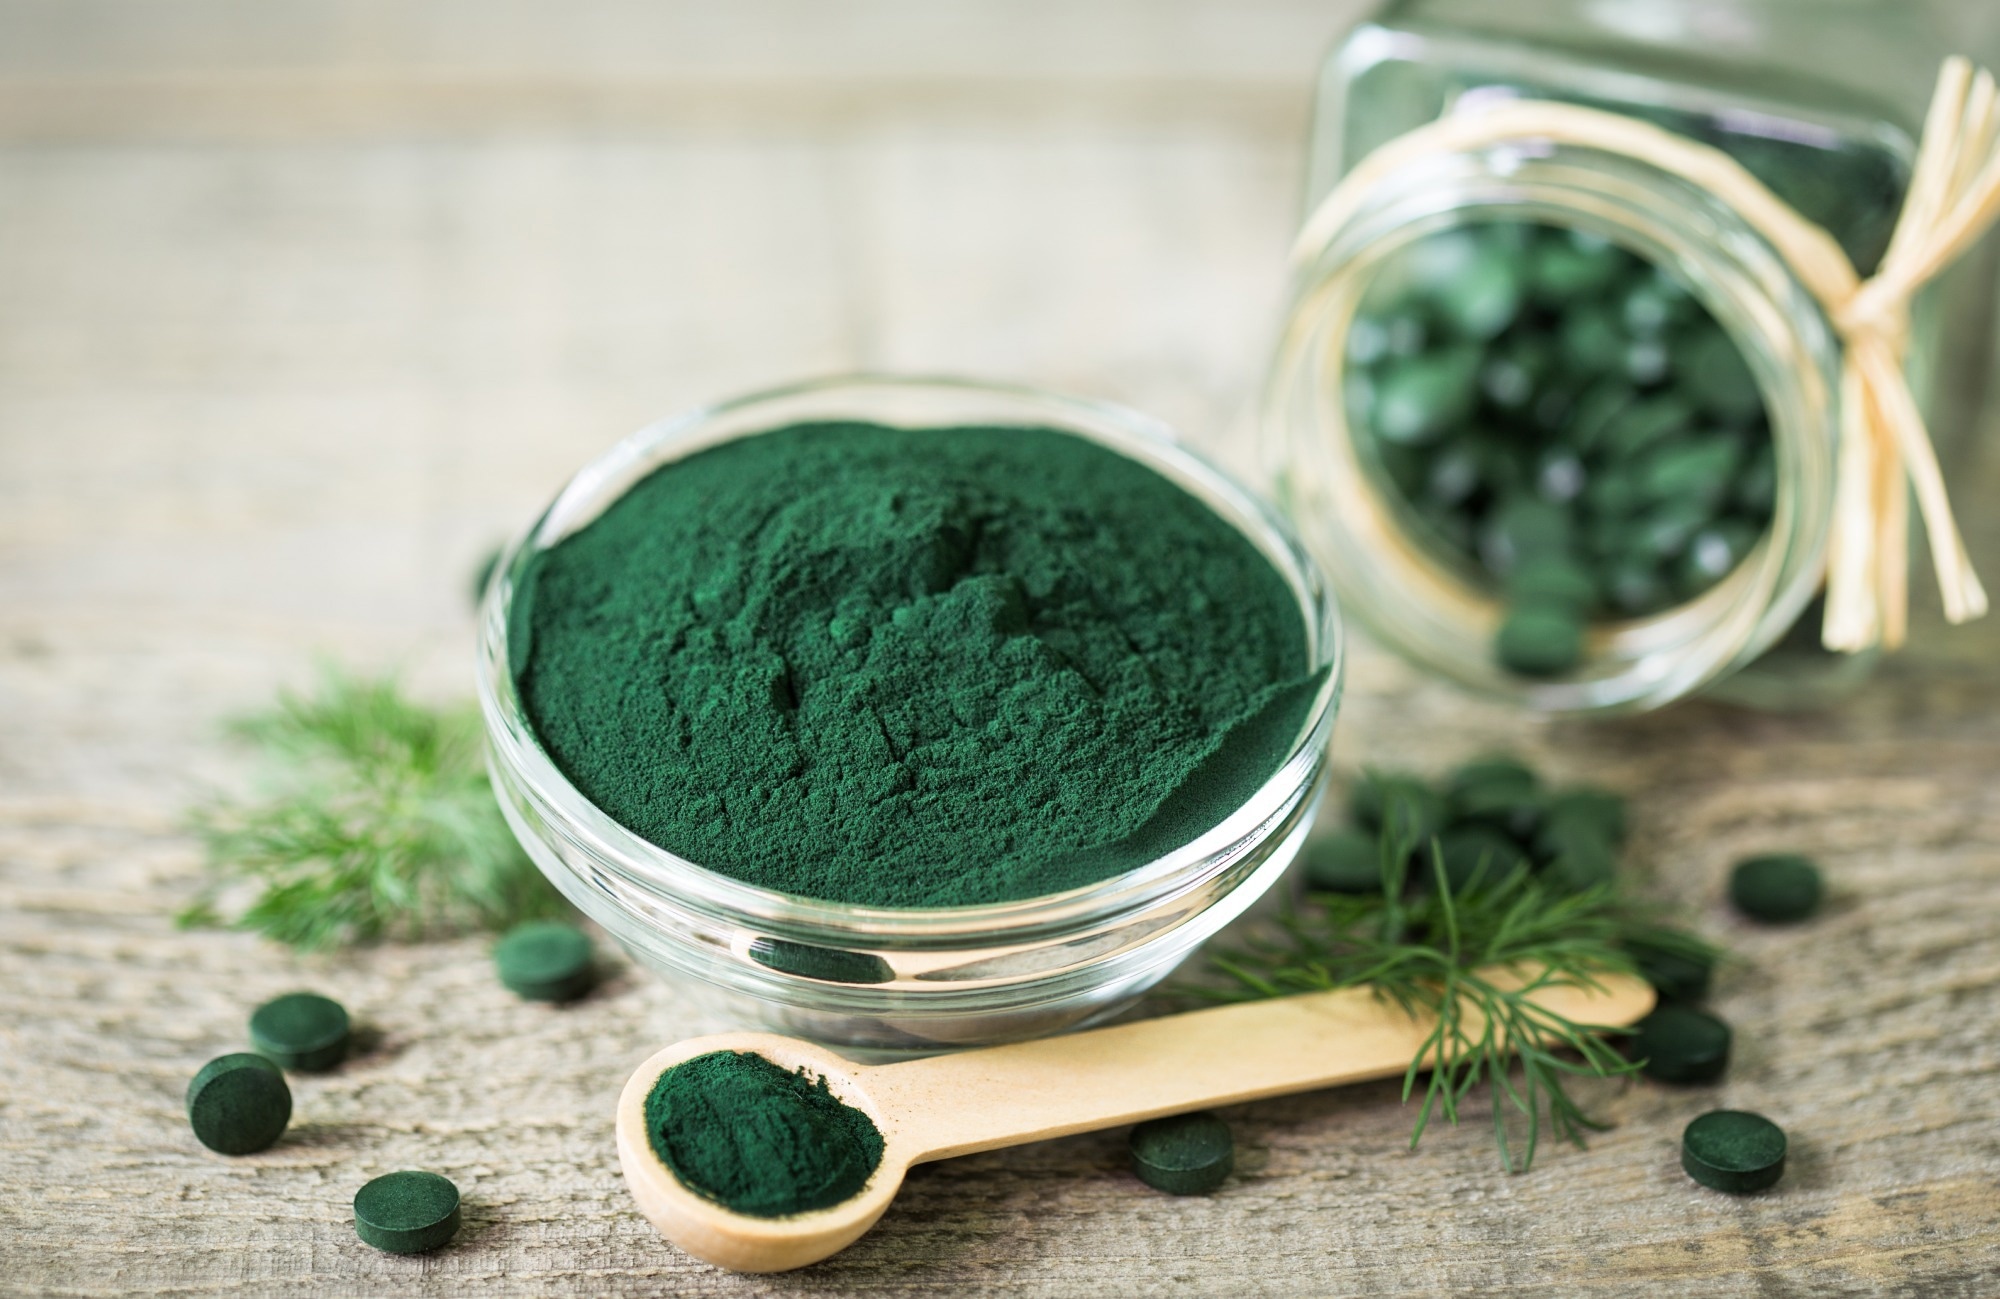 Study: Spirulina Supplementation with High-Intensity Interval Training Decreases Adipokines Levels and Cardiovascular Risk Factors in Men with Obesity. Image Credit: pilipphoto/Shutterstock.com